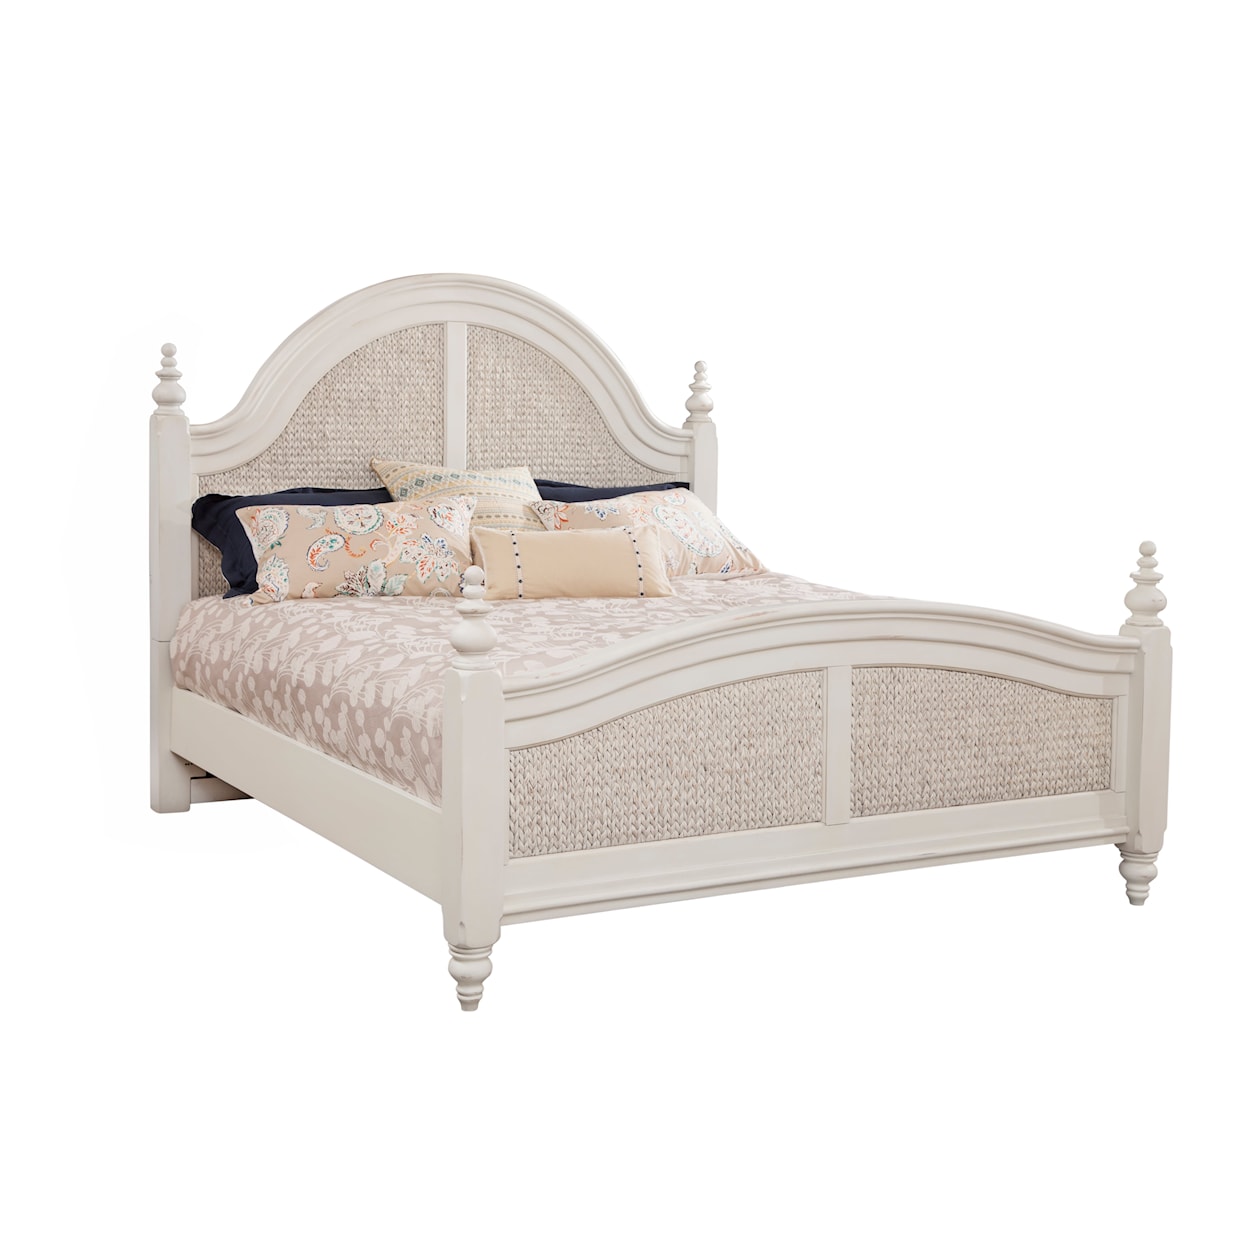 American Woodcrafters Rodanthe Queen Woven Bed